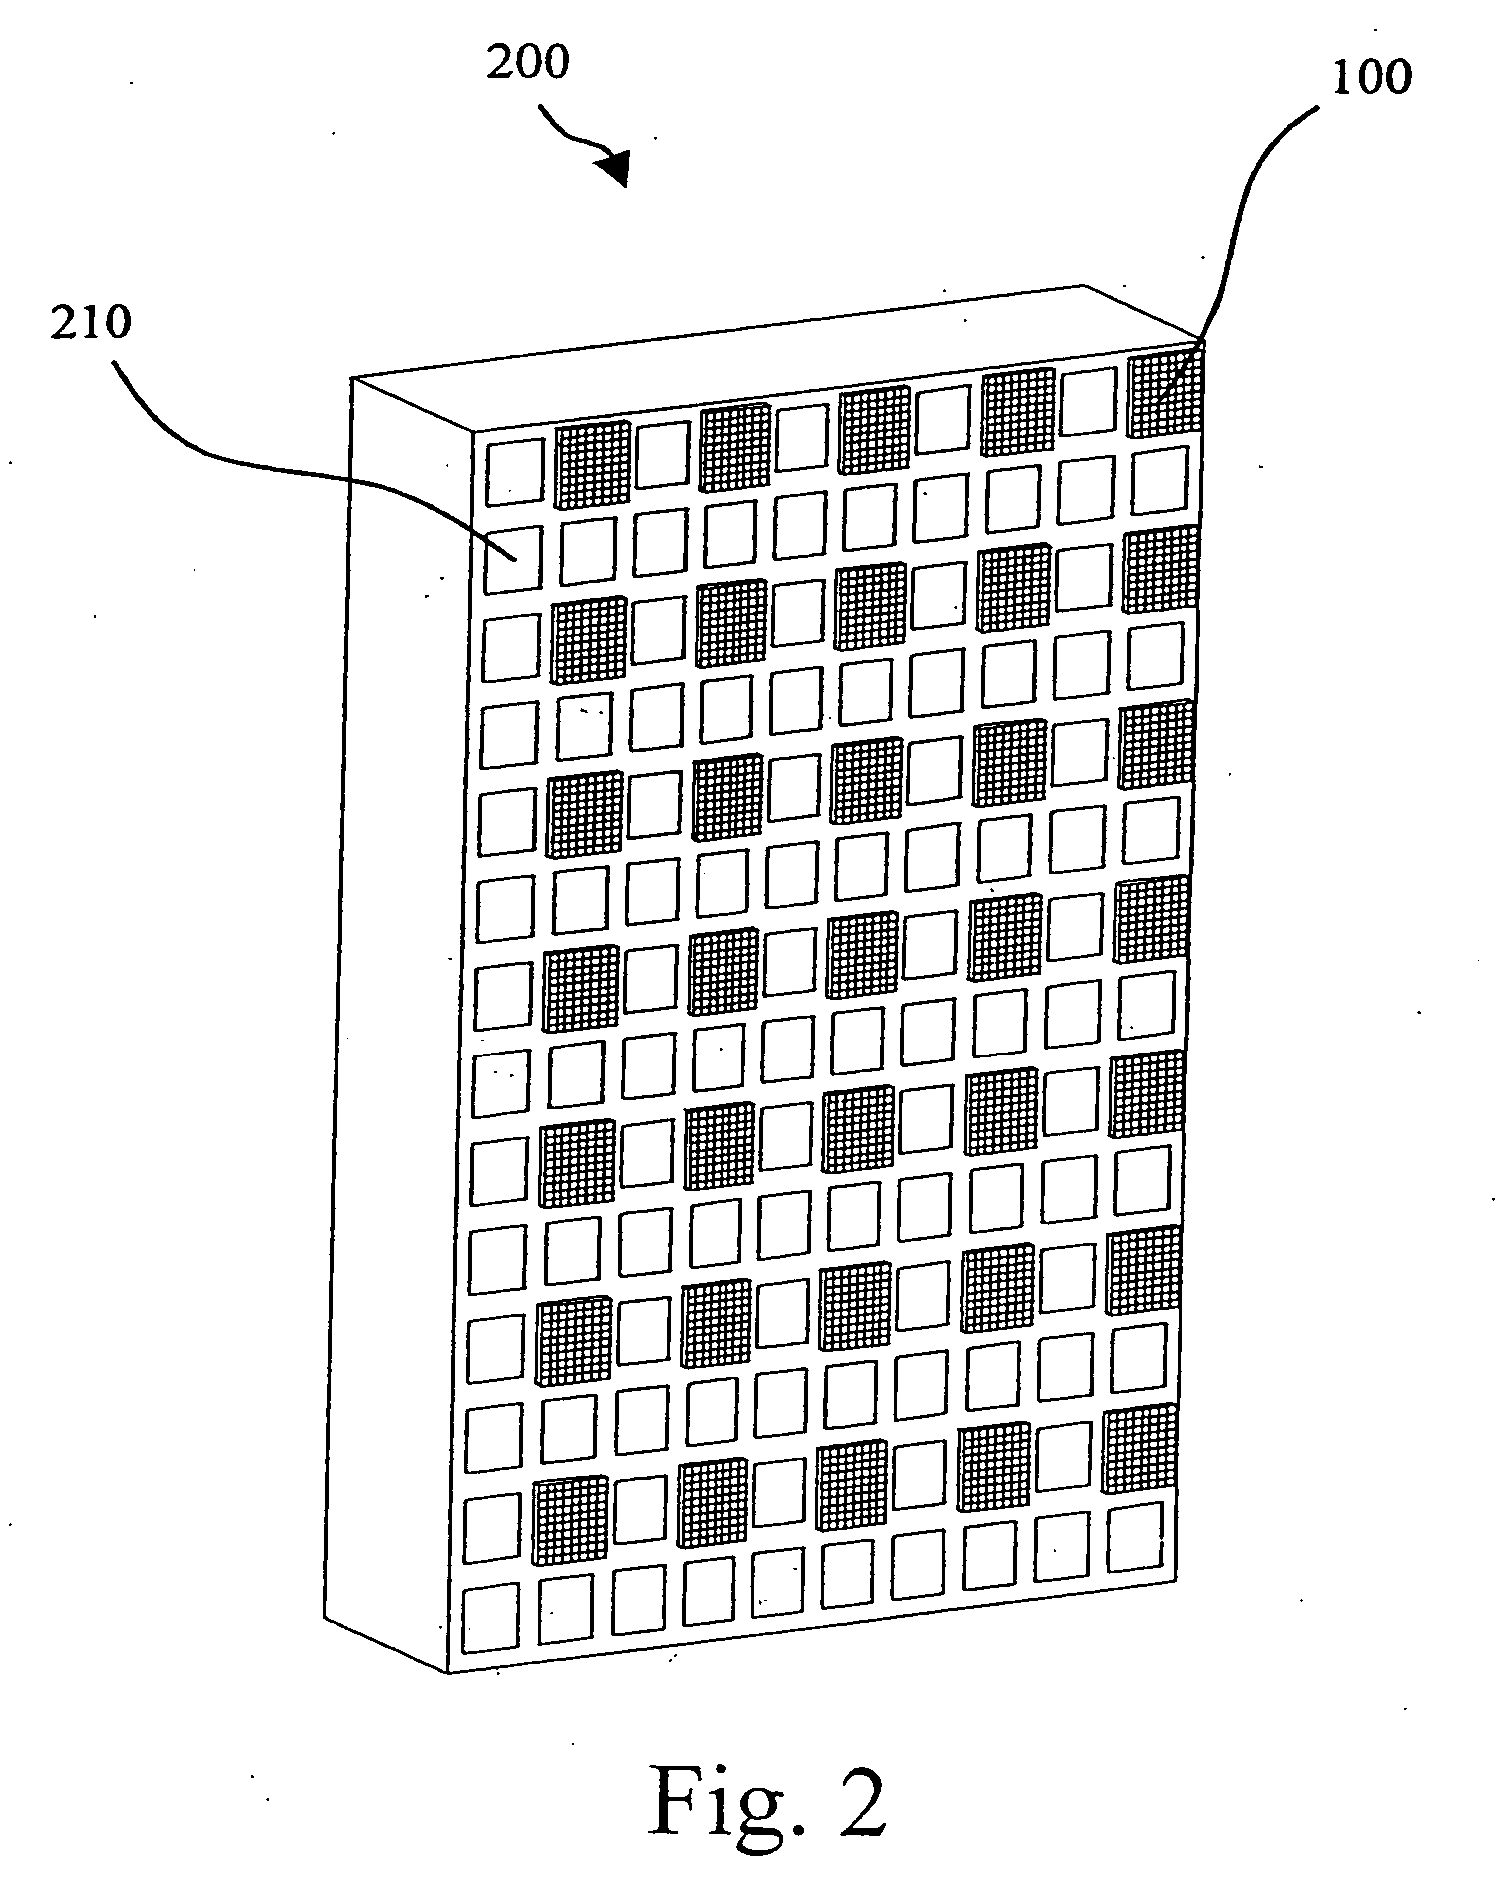 Display element and mechanical mounting interface used therein